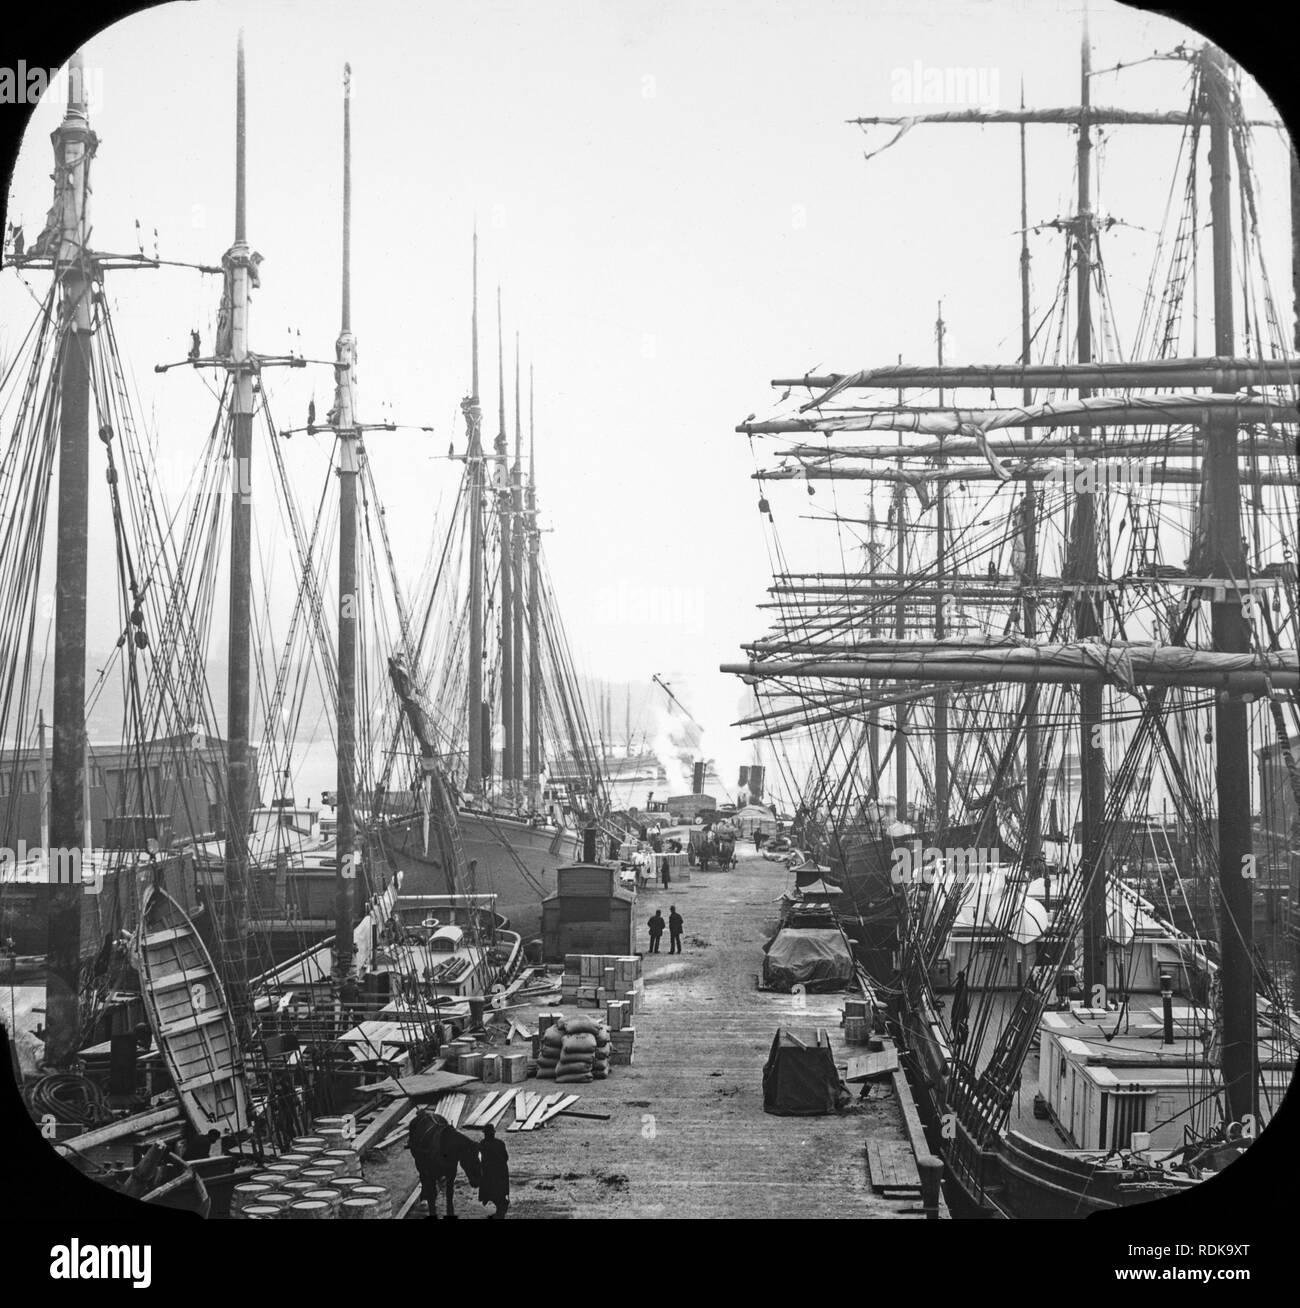 Late Victorian view of the docks in New York City. many sailing ships can be seen loading or unloading their goods. Stock Photo